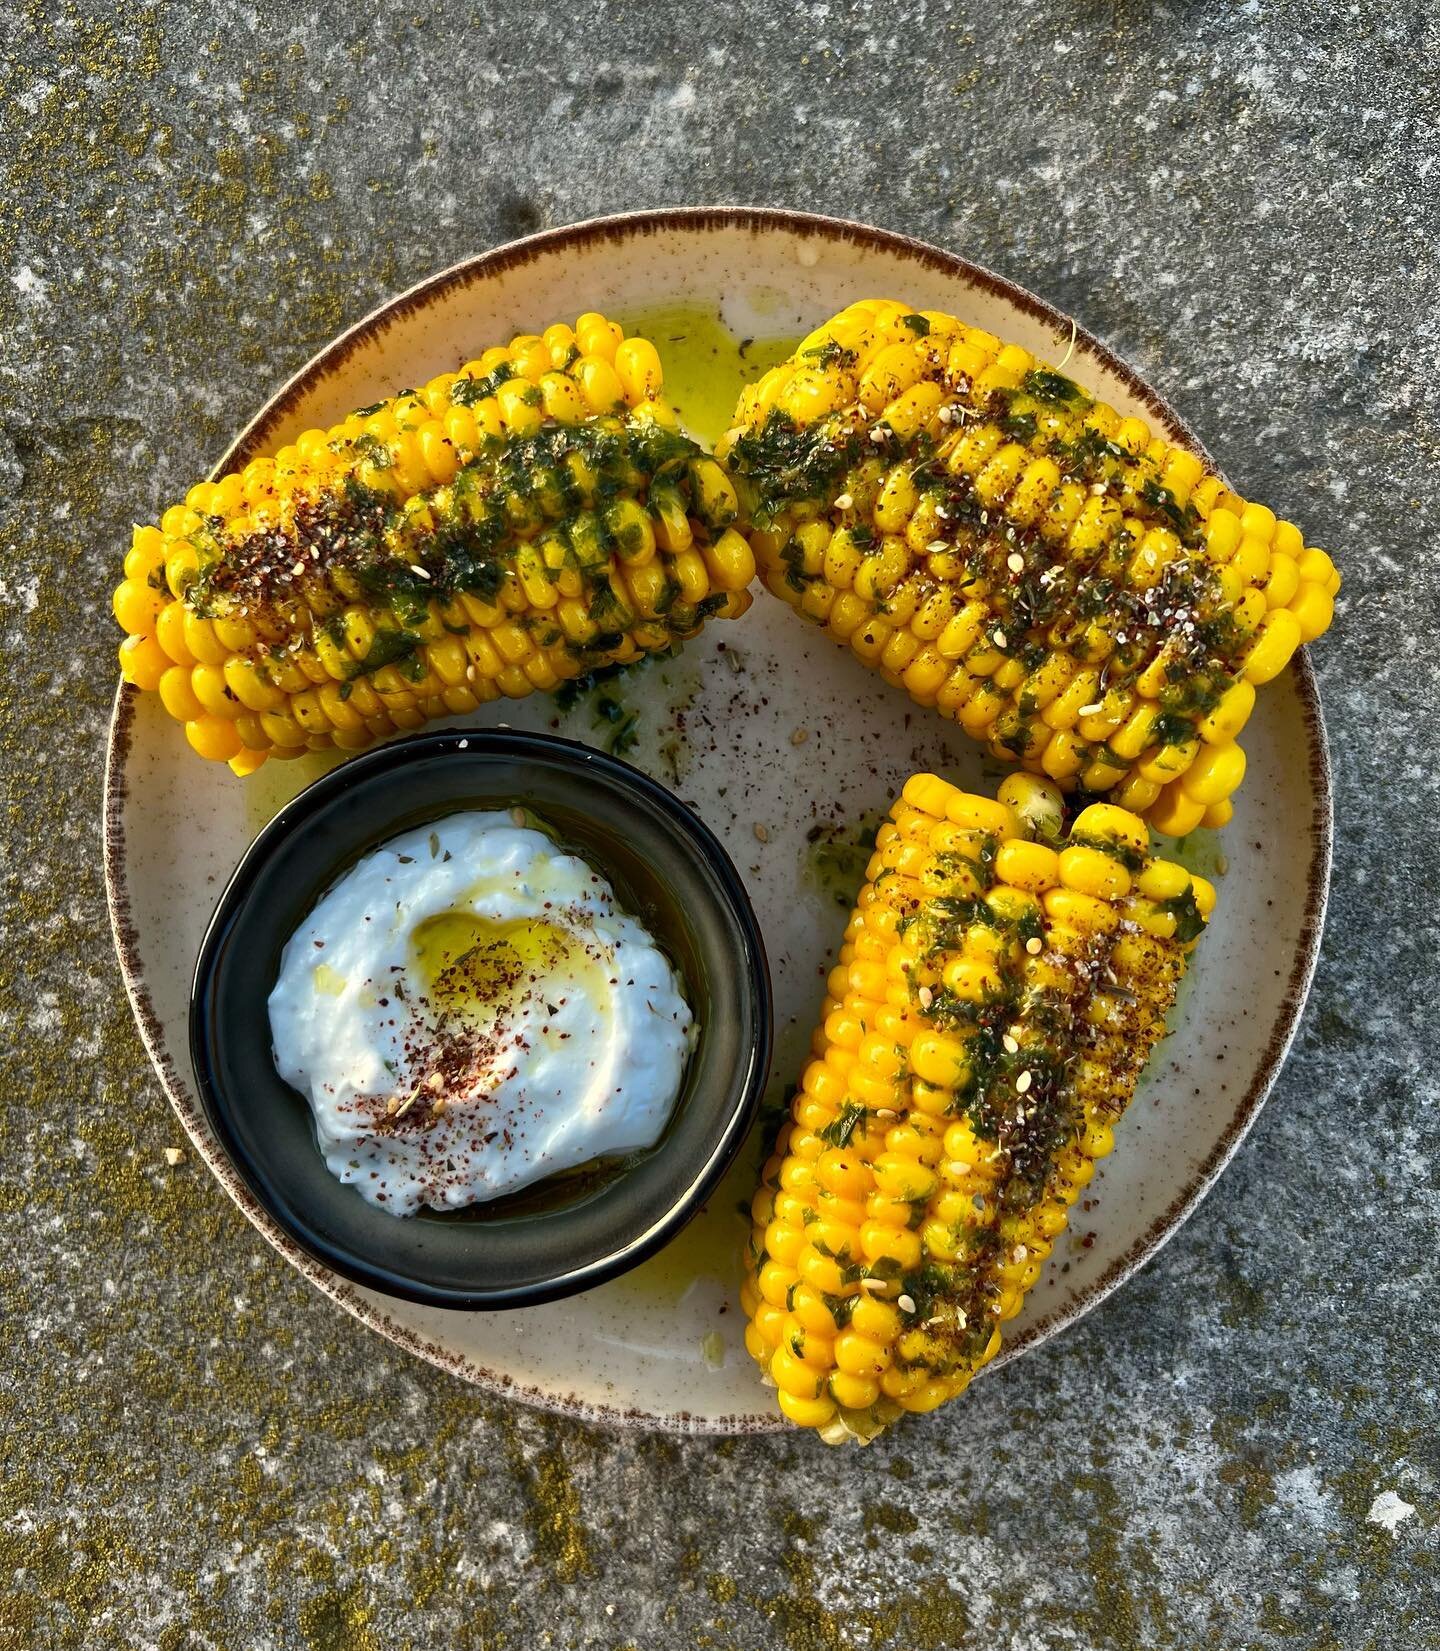 I suppose autumn is officially here, so here is a season appropriate plate! Saying goodbye to tomato season is always difficult but I&rsquo;m looking forward to more autumnal dishes&hellip;.
Corn with wild garlic pesto and za&rsquo;atar is paired wit